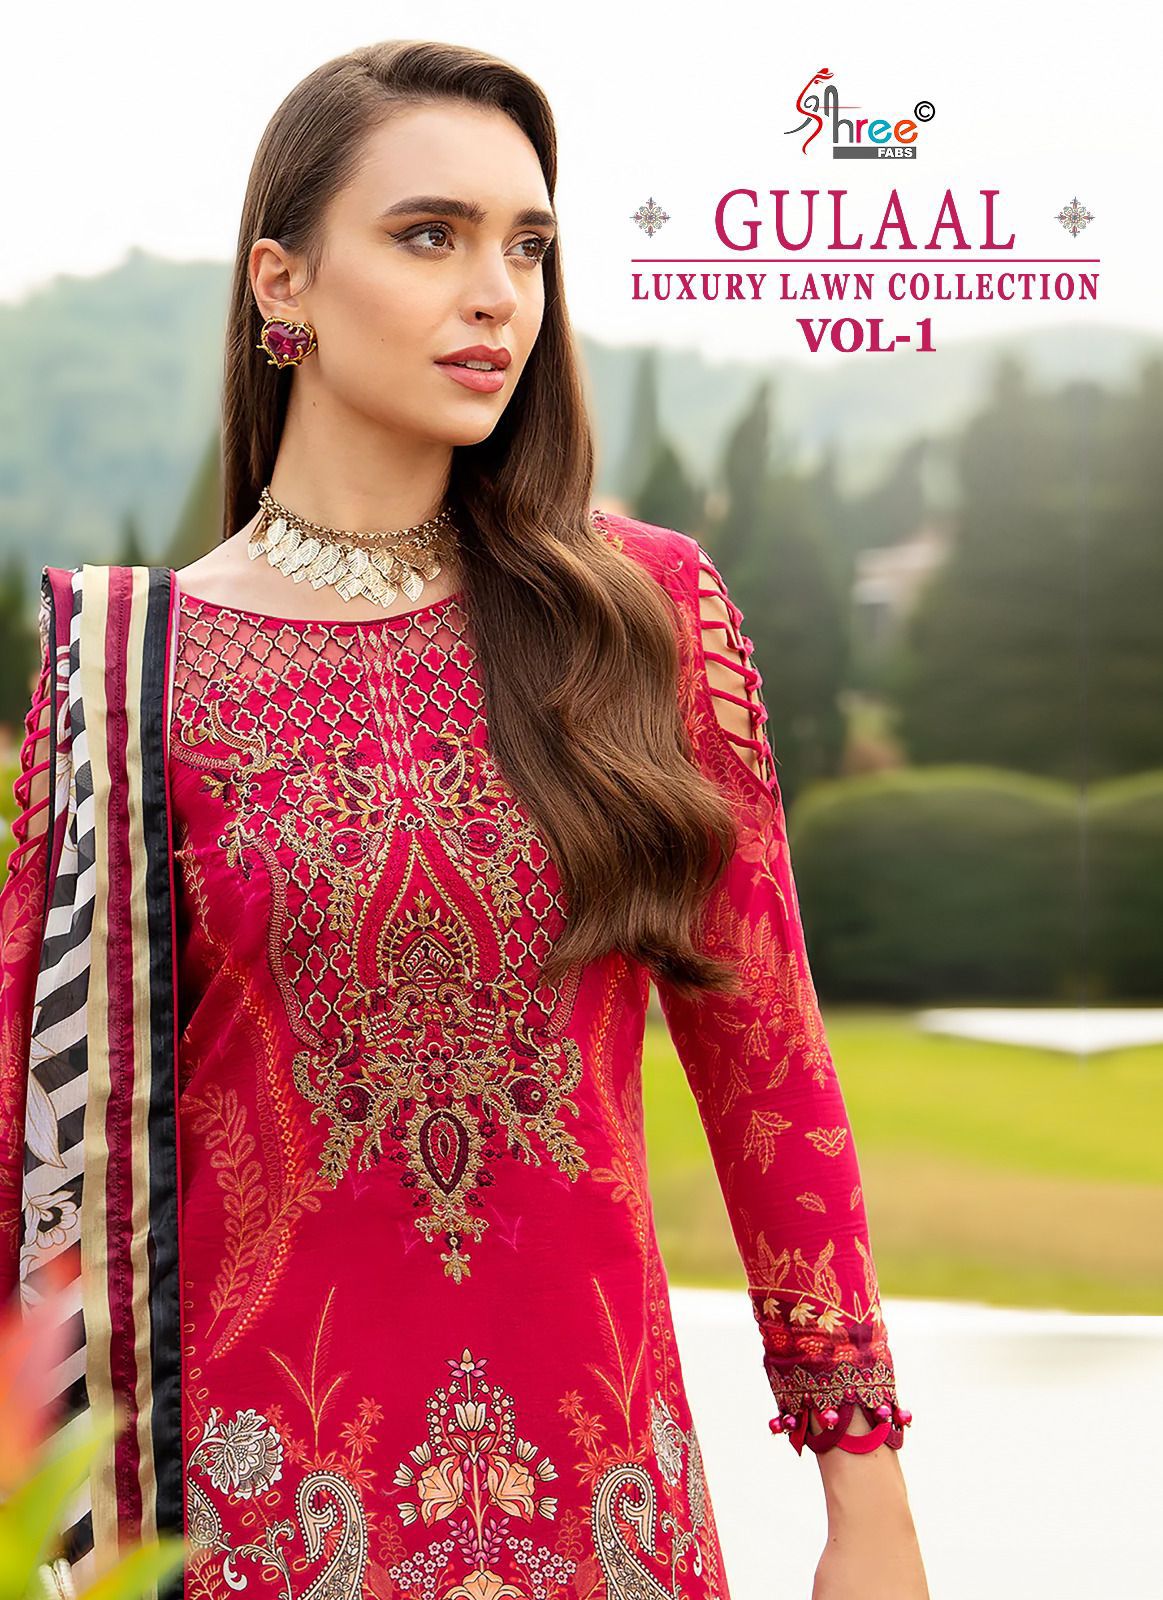 SHREE FABS GULAAL VOL 1 LUXURY LAWN COLLECTION SALWAR SUIT SUPPLIER IN SURAT